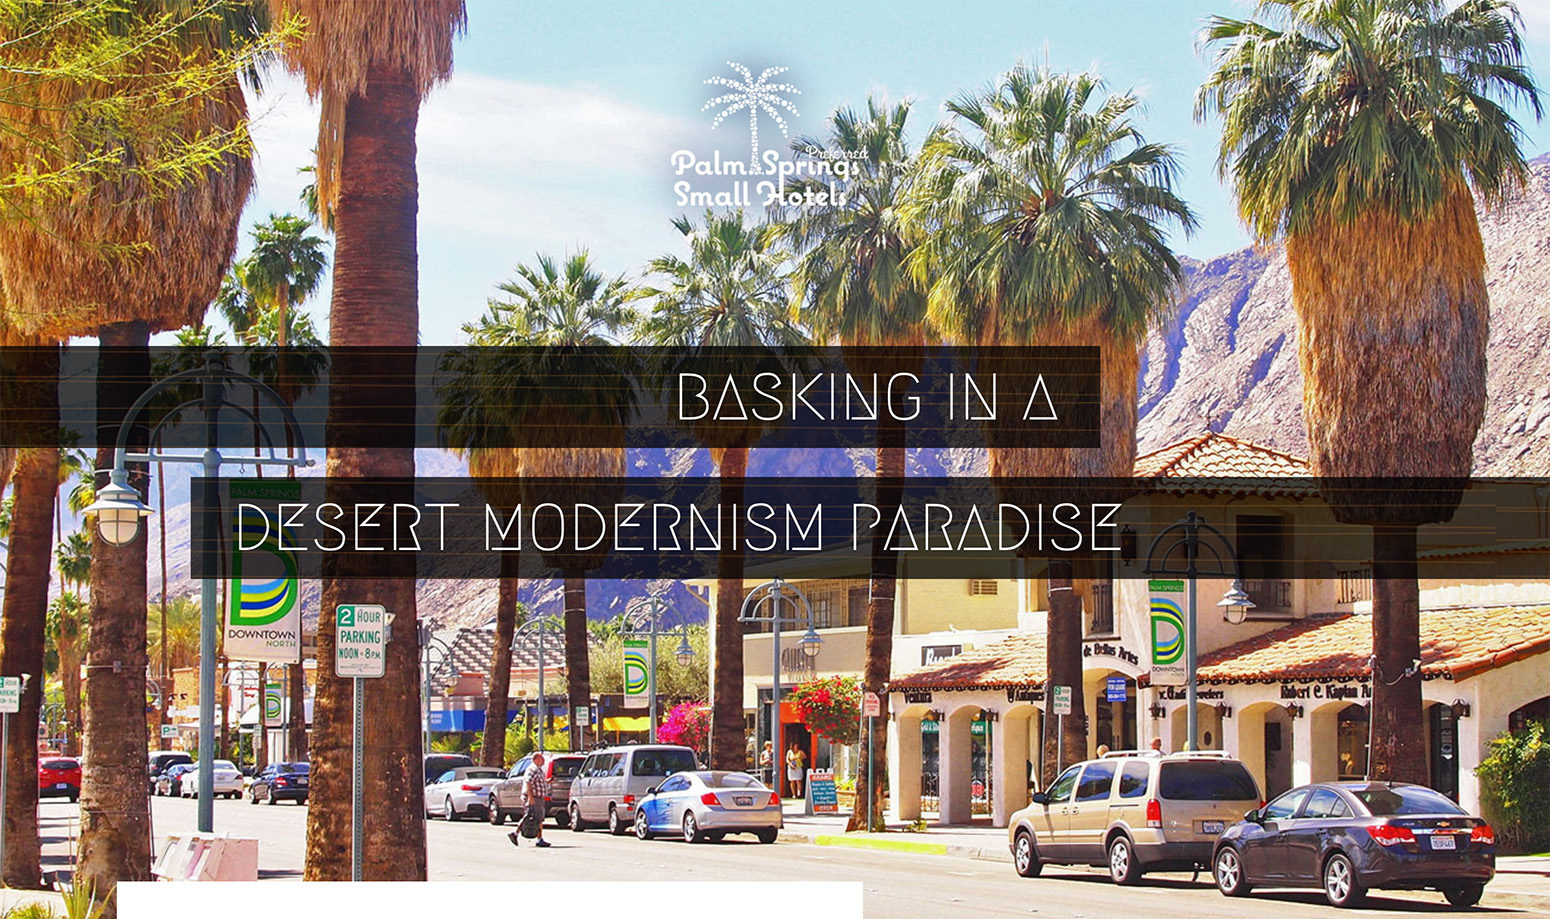 Palm Springs is a mid-century paradise